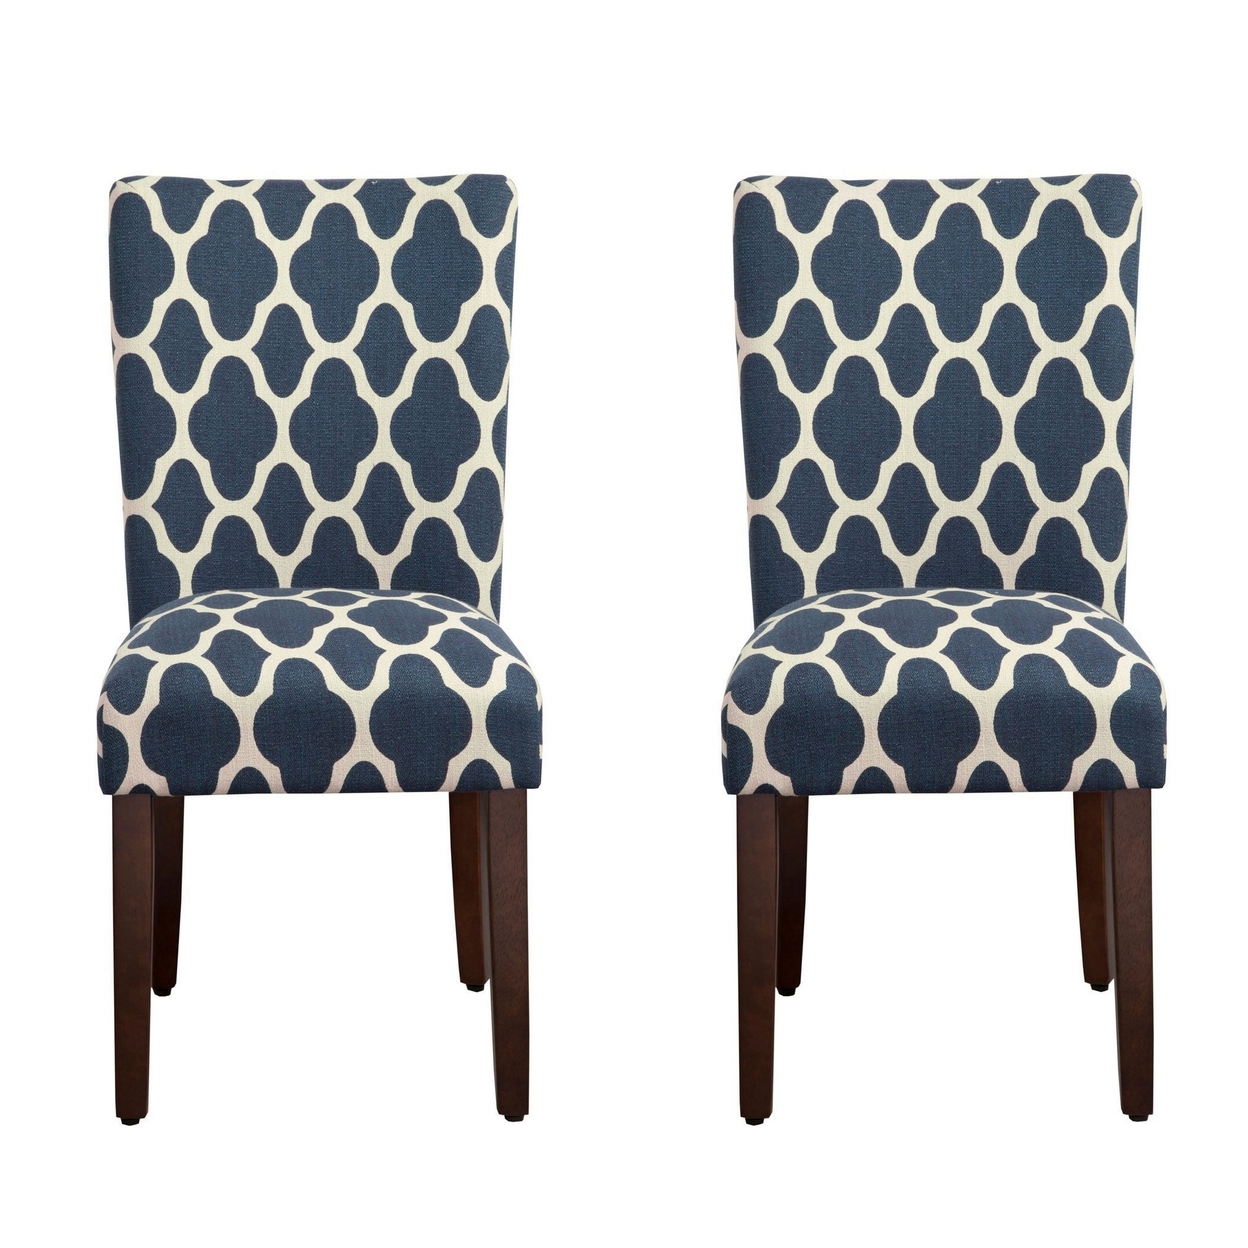 Wooden Parson Dining Chairs With Quatrefoil Patterned Fabric Upholstery, Blue And White, Set Of Two-Saltoro Sherpi